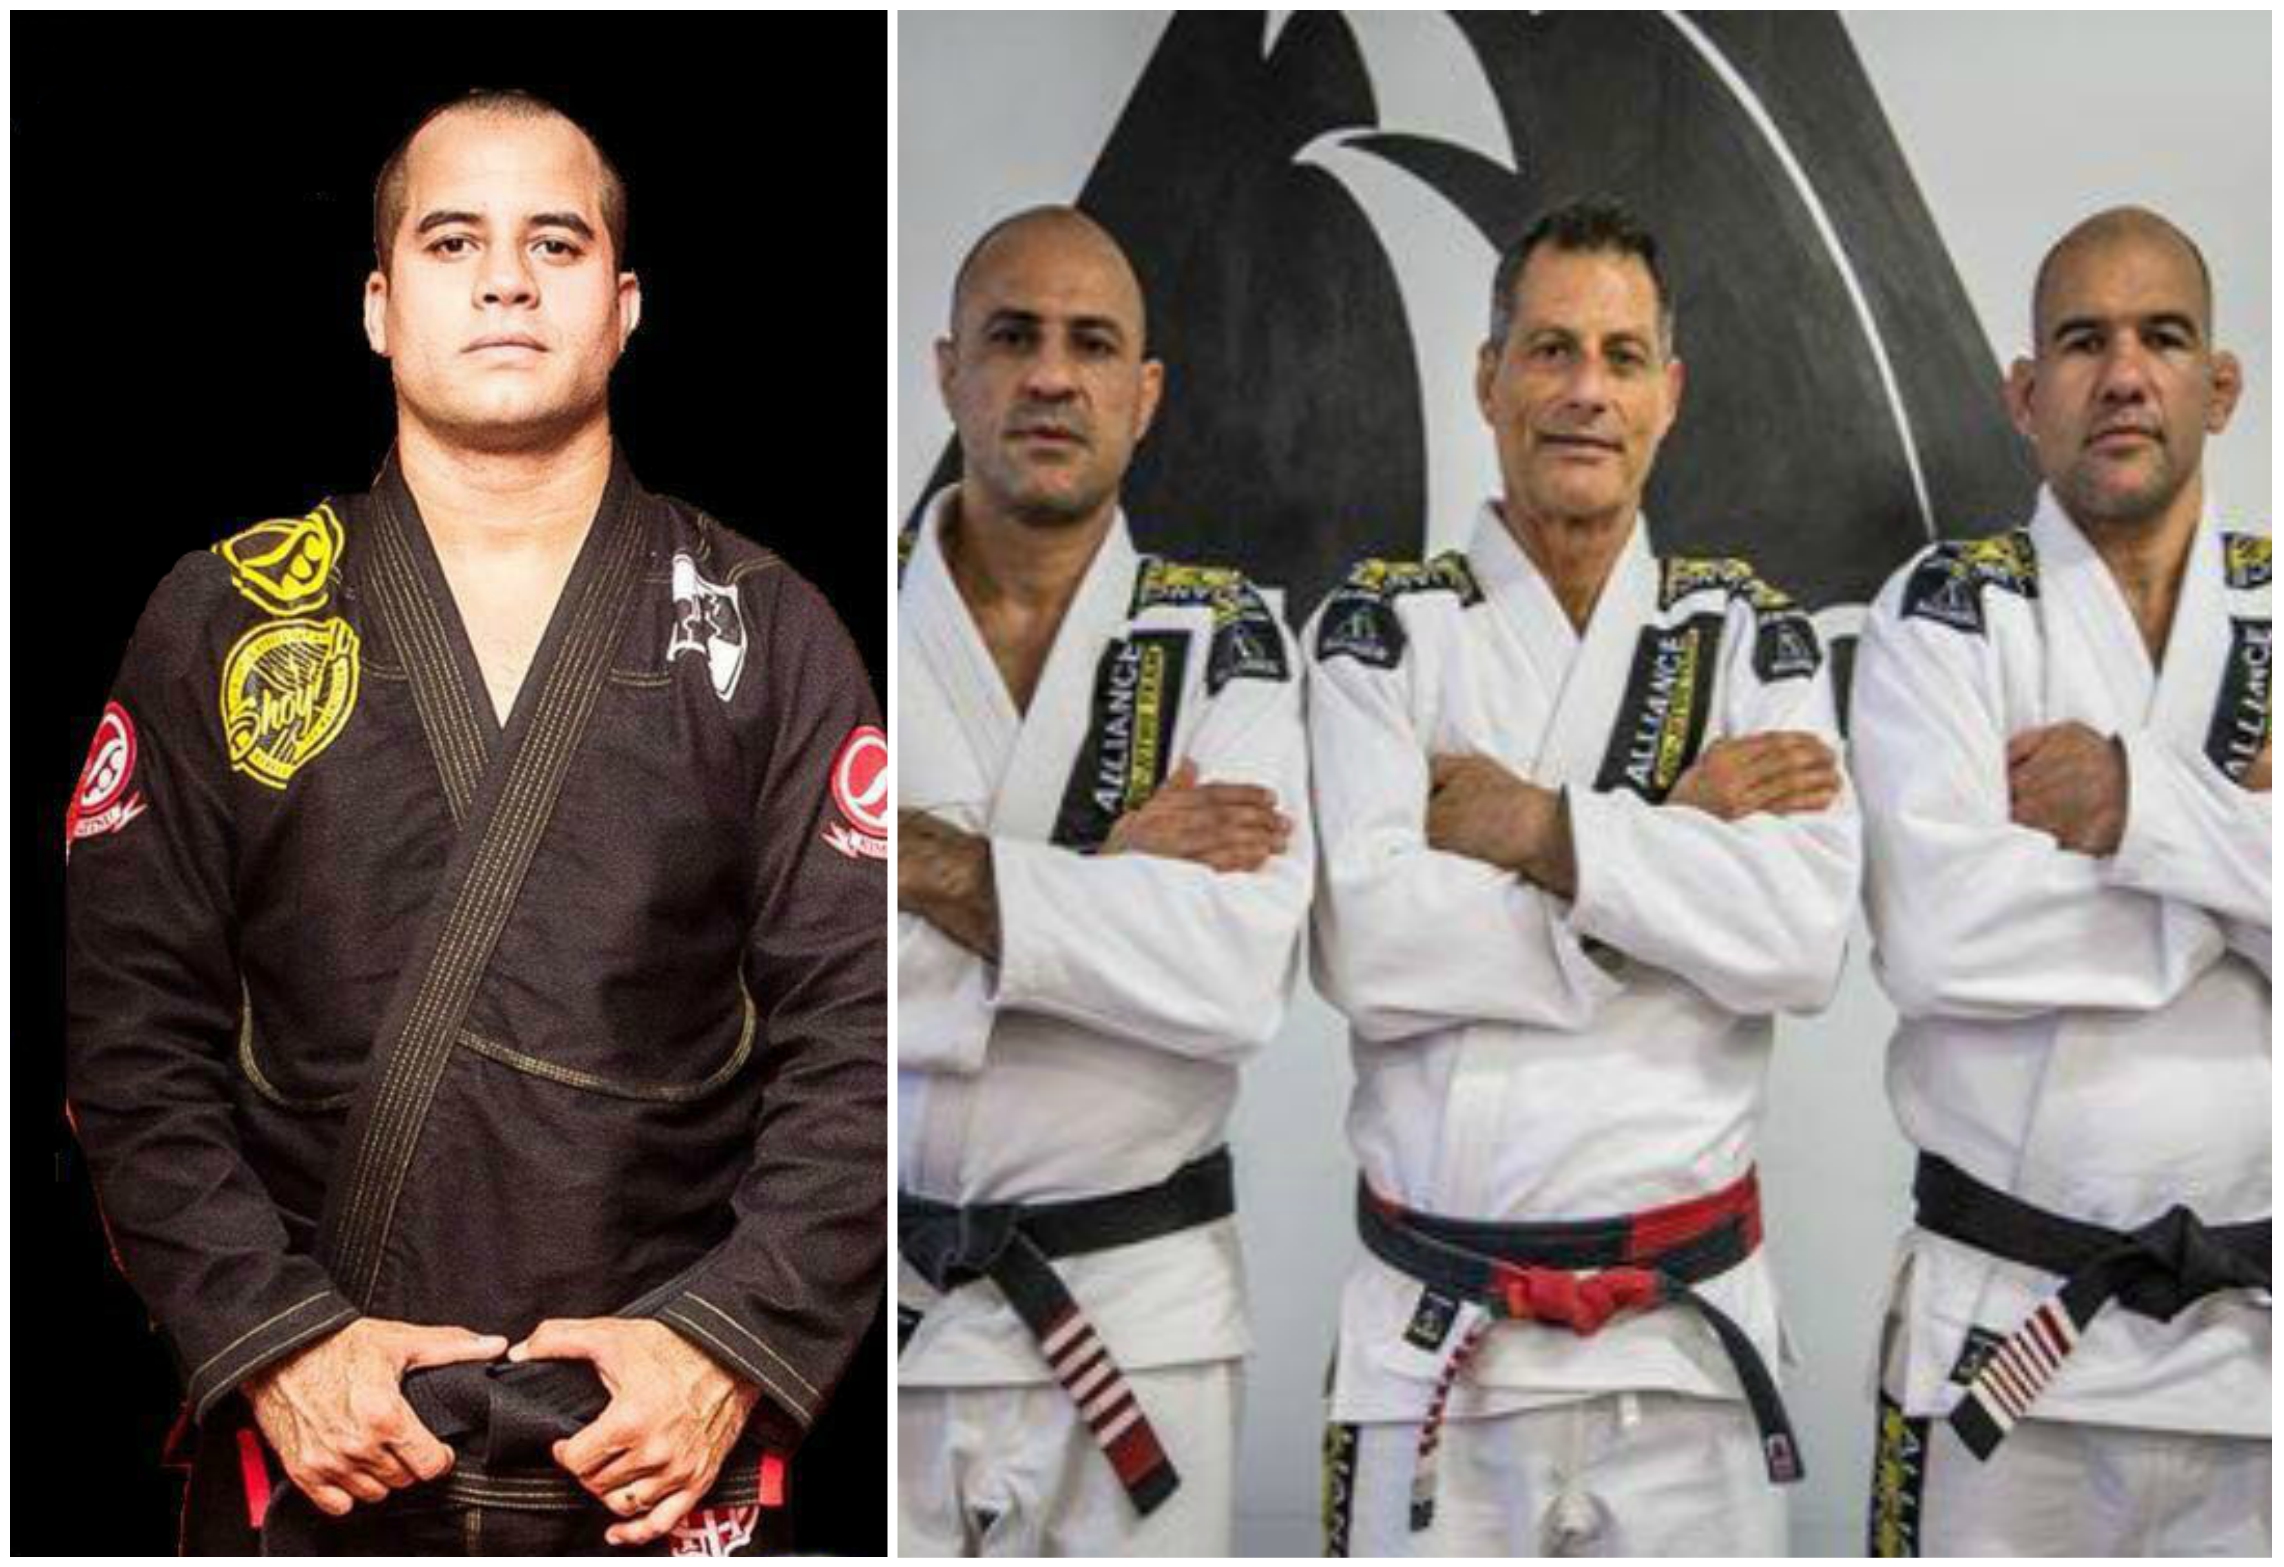 Checkmat Leader Leo Vieira on How He Got Kicked out of Alliance